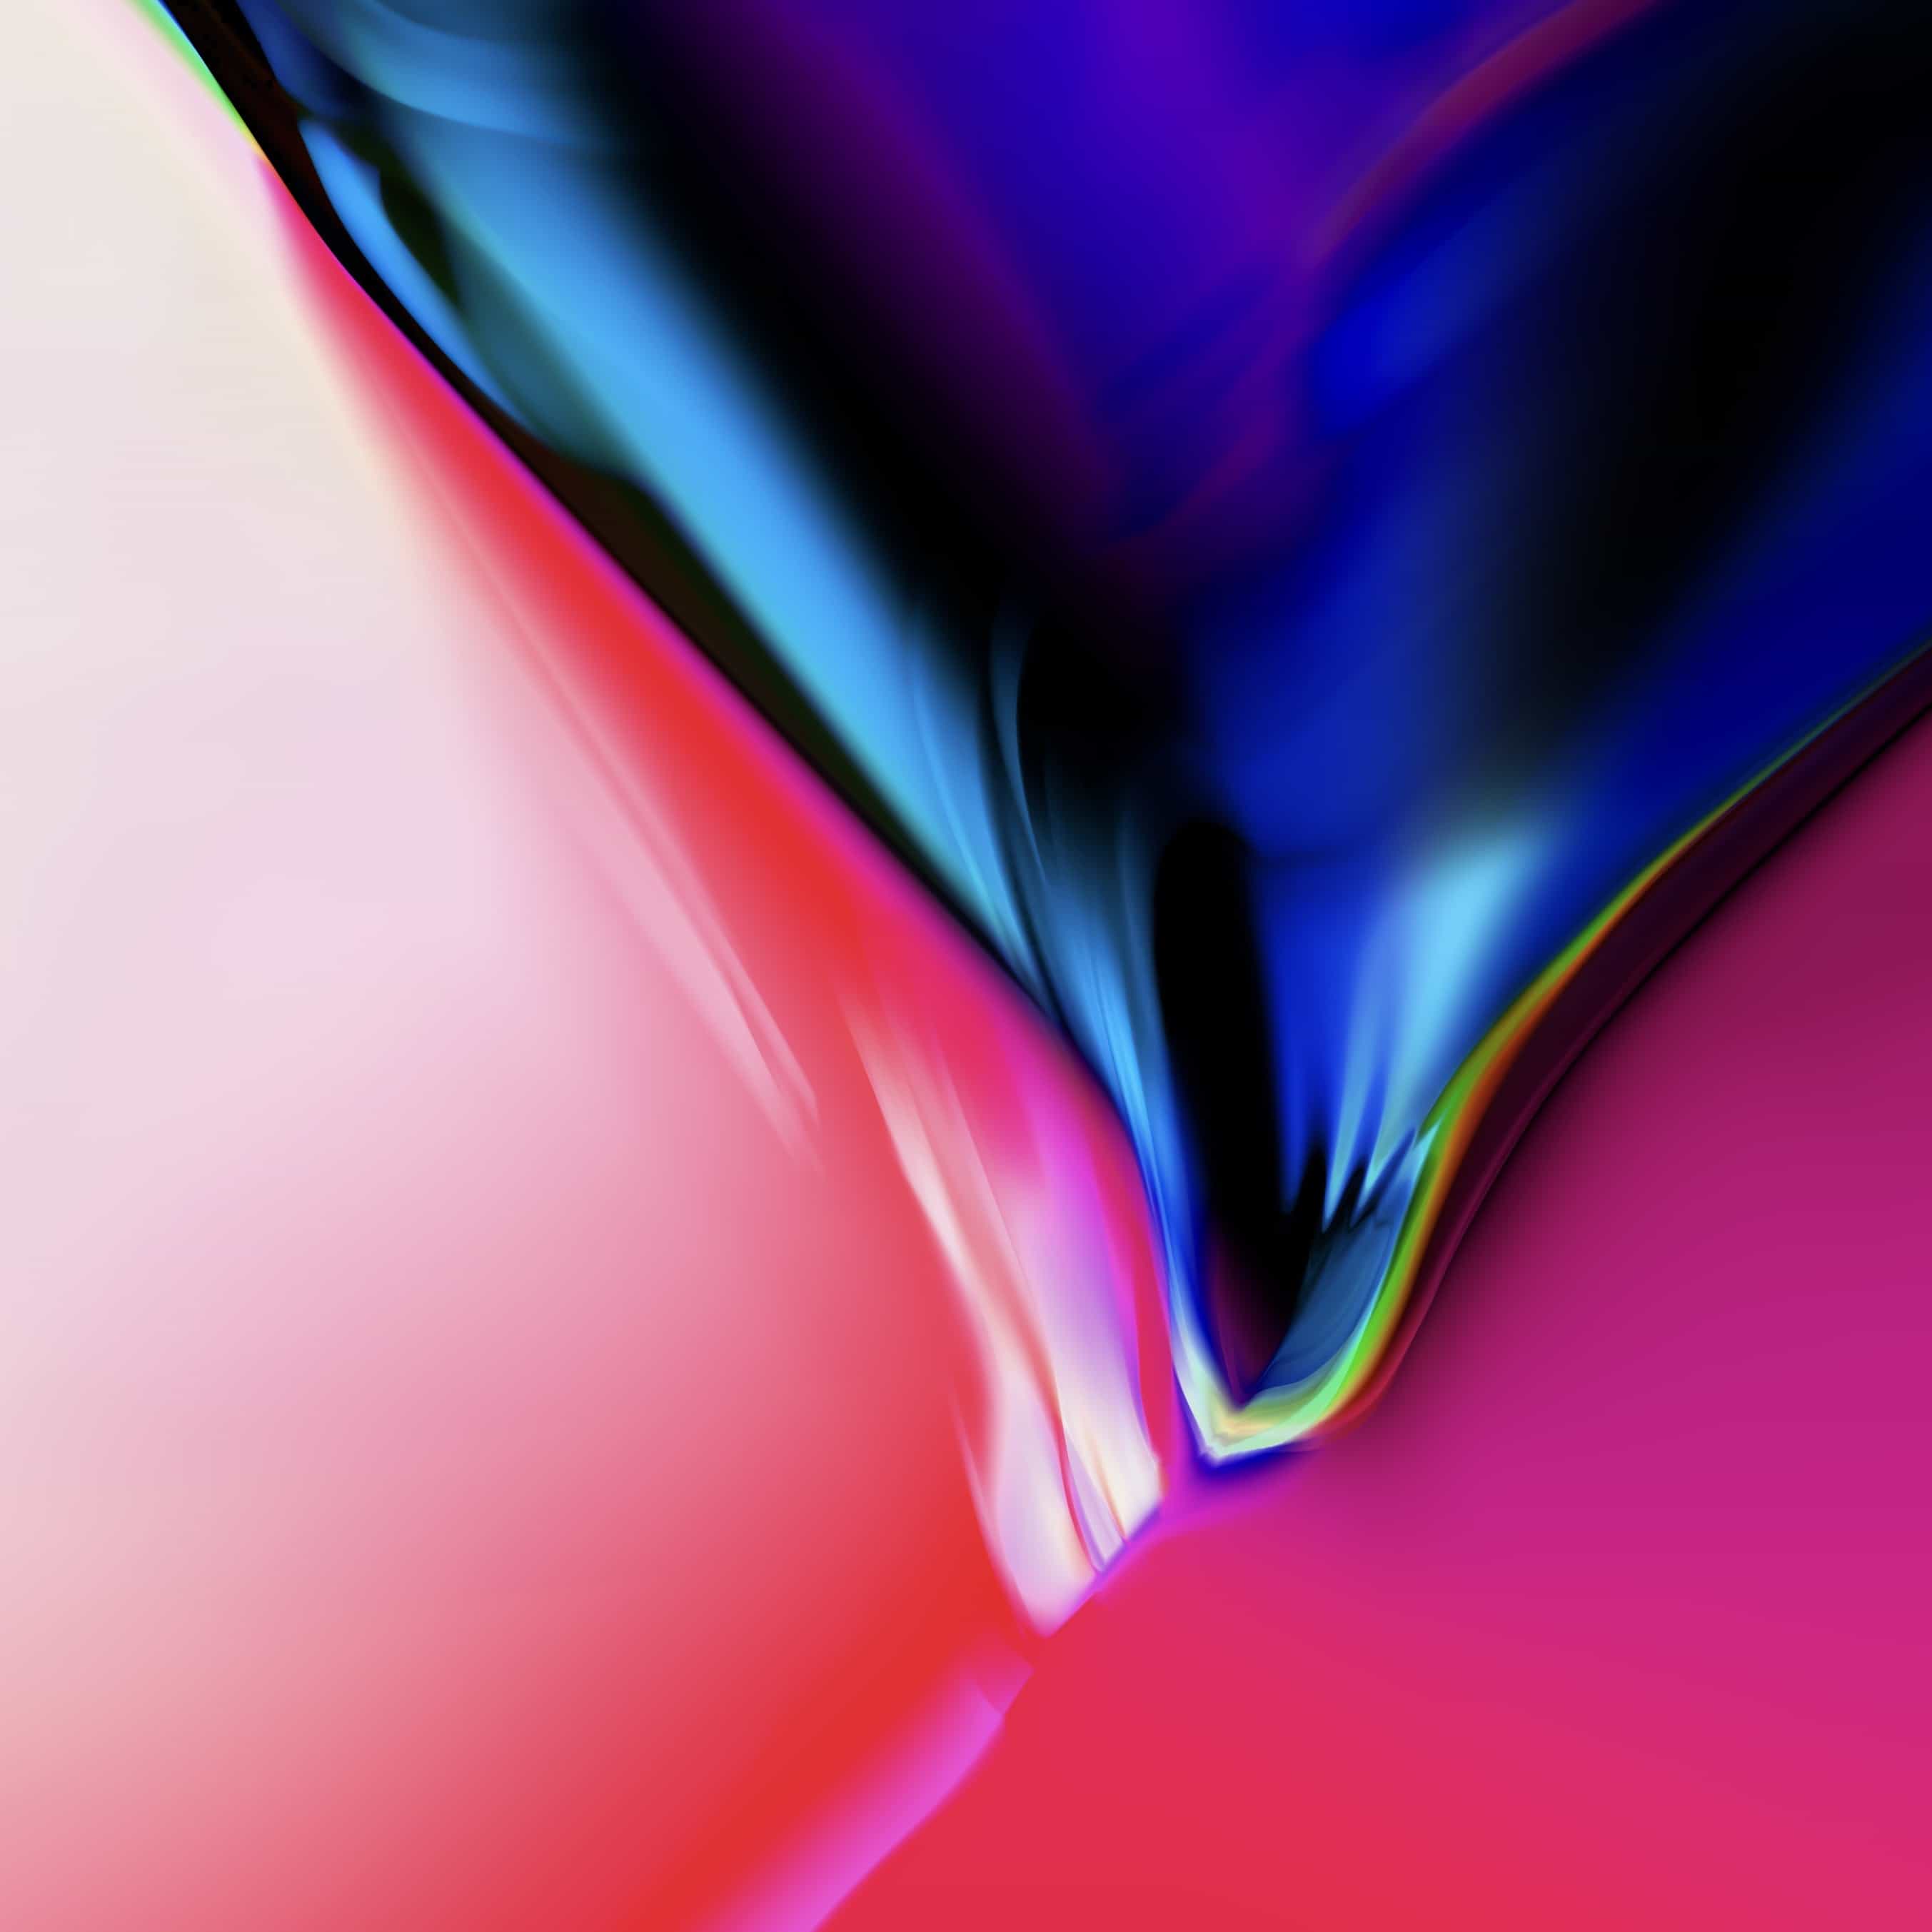 iOS 11 Stock Wallpapers 19 • Download iOS 11 Stock Wallpapers [40 Wallpapers]